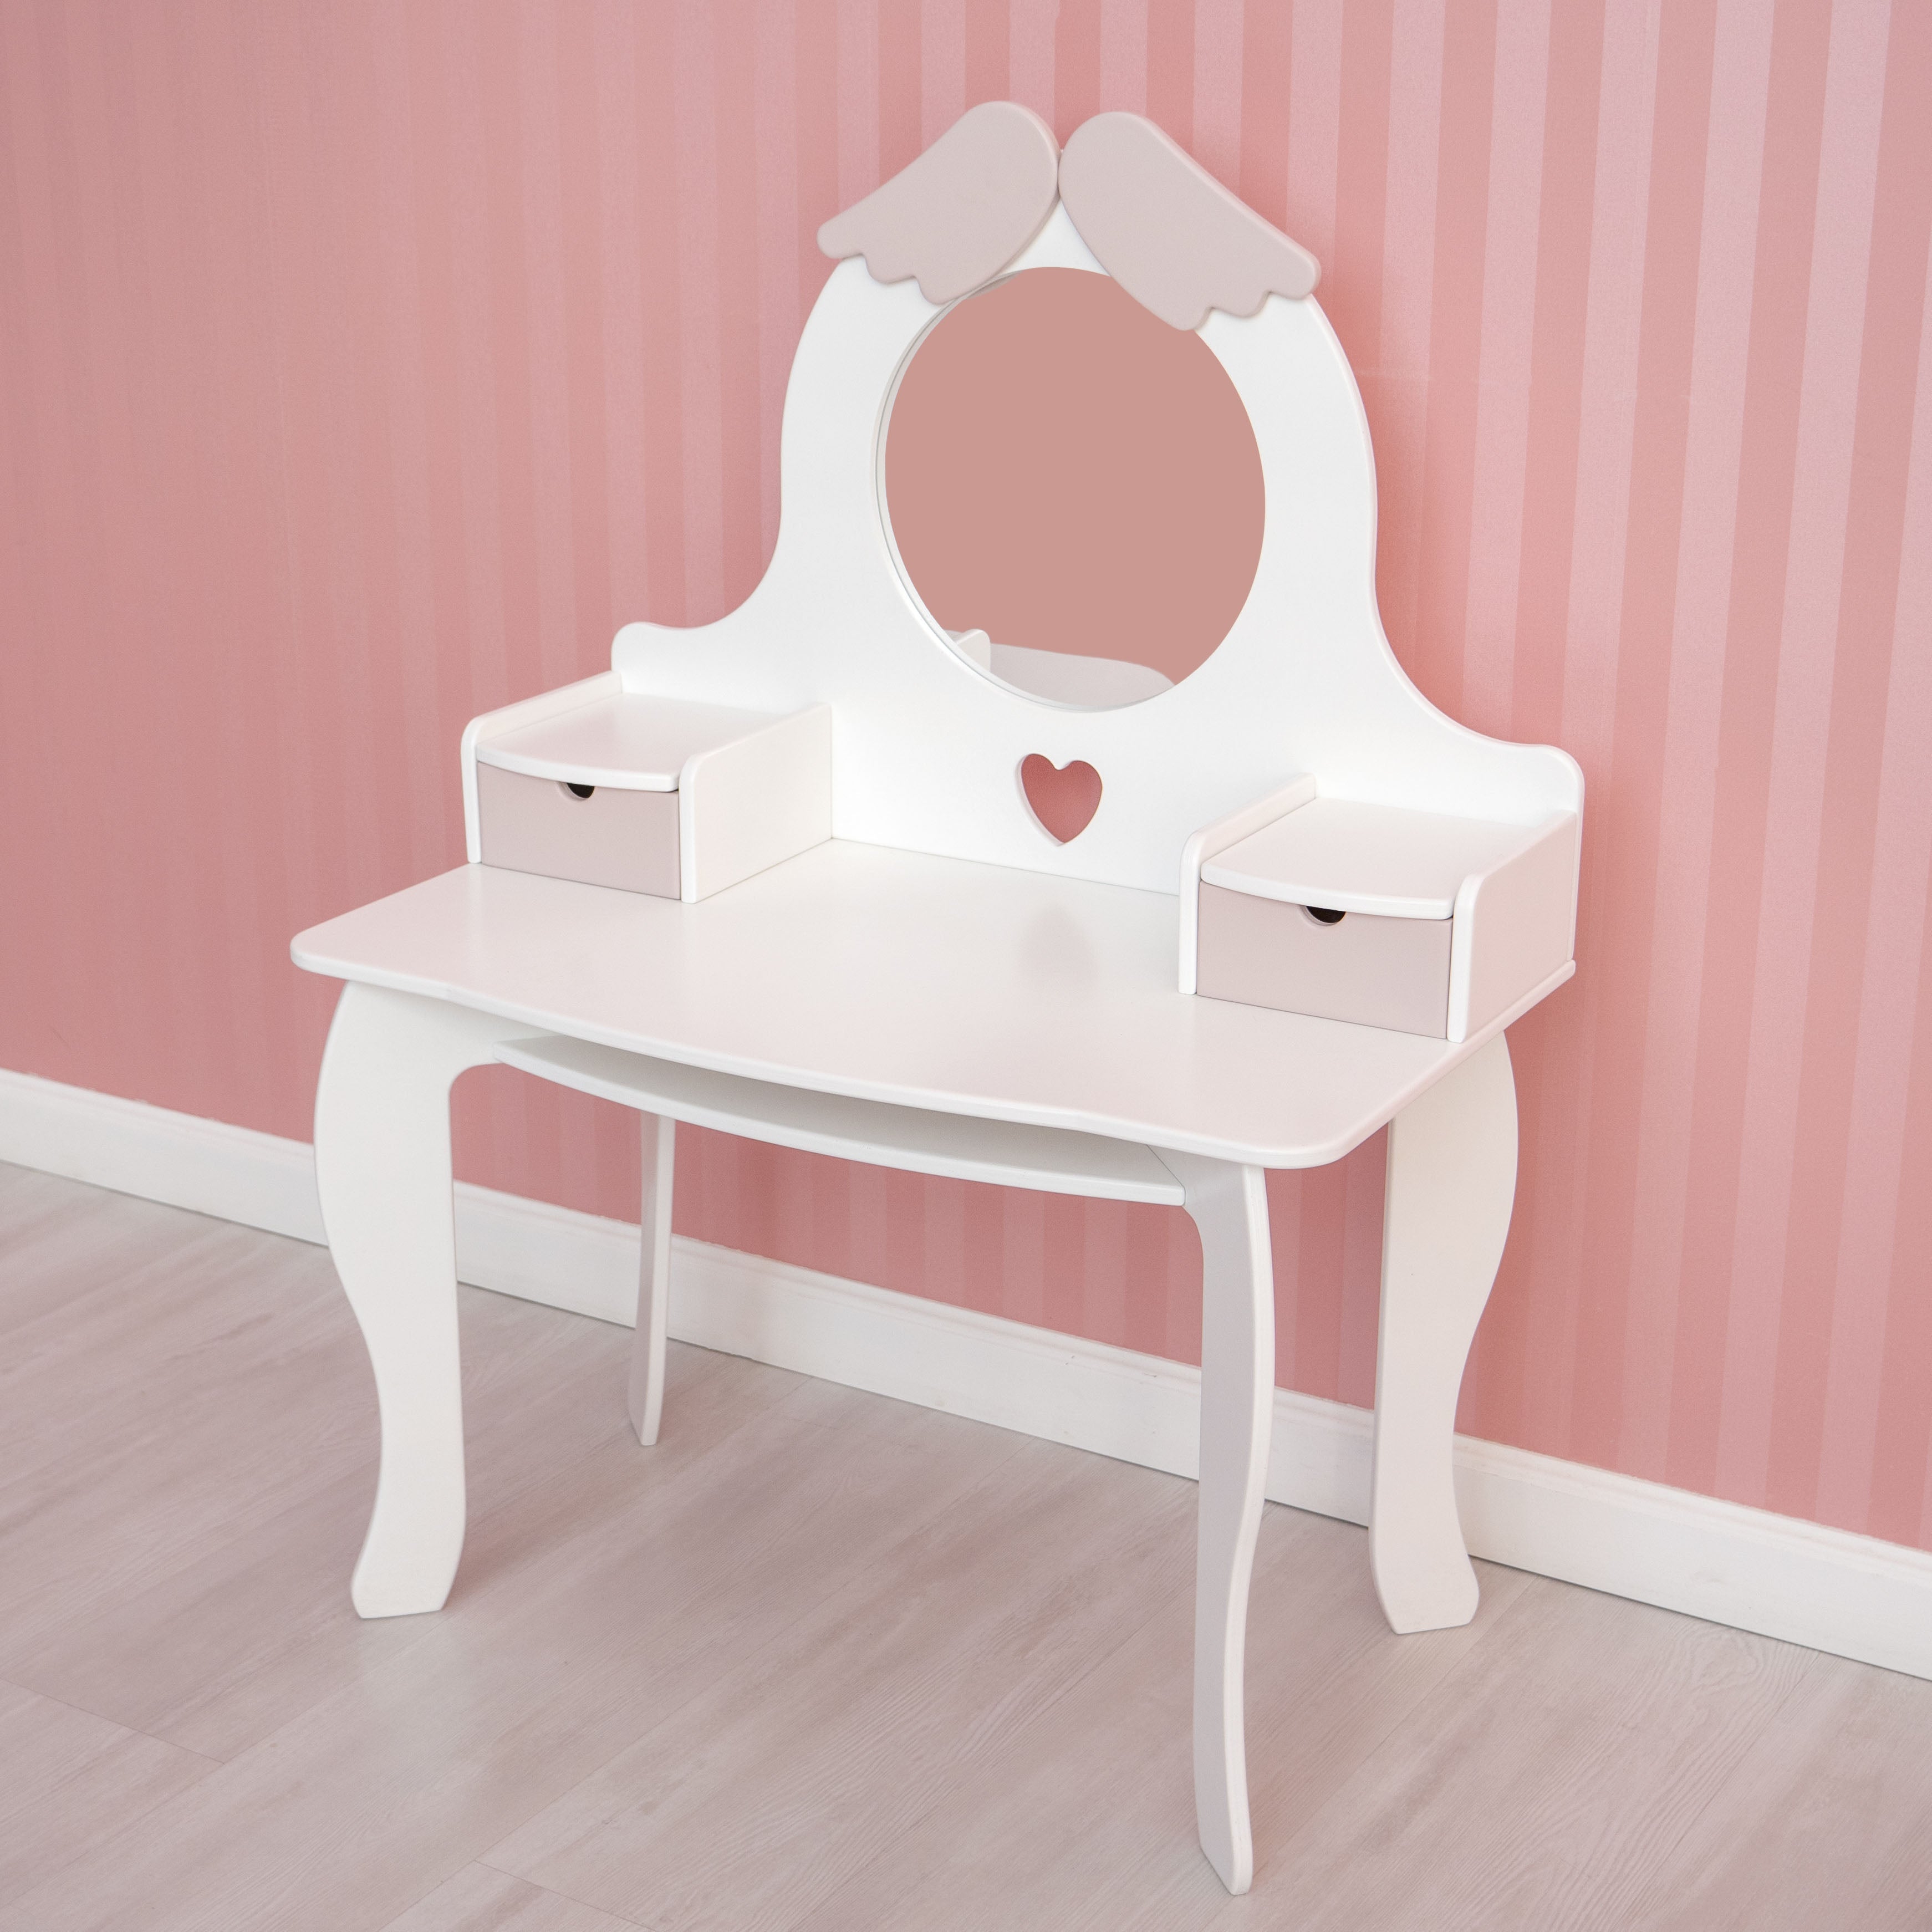 Amazon.com: UIIAIOUIAIO Kids Vanity Table, Princess Makeup Dressing Table  with Drawer & Tri-Folding Mirror, 2-in-1 Vanity Set with Detachable Top,  Pretend Beauty Play Vanity Set for Girls (Pink) : Toys & Games